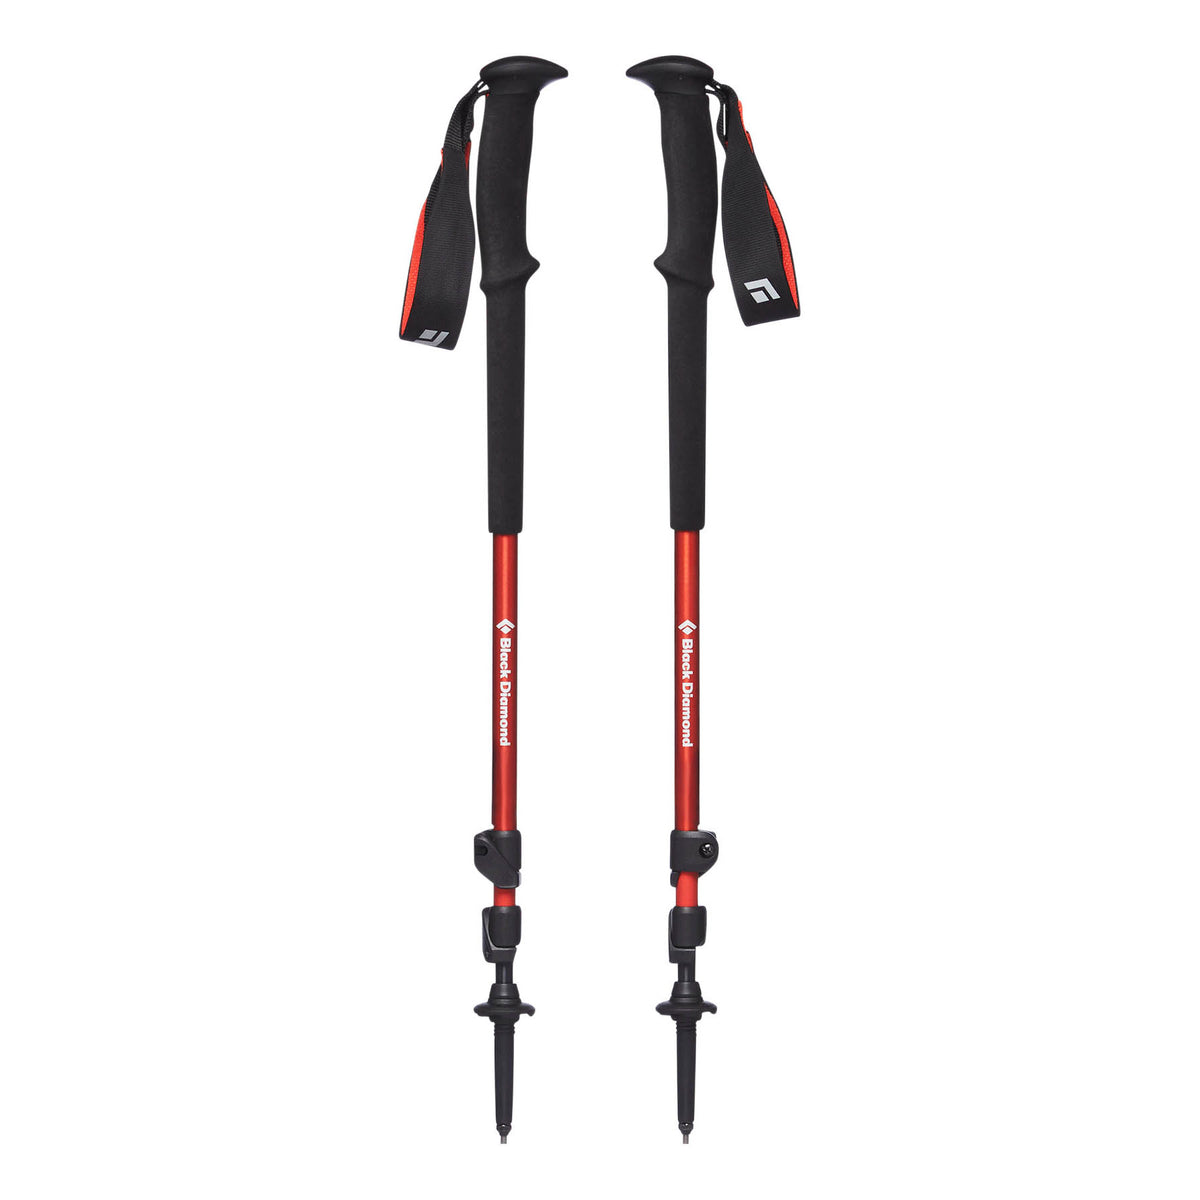 Pair of Black Diamond Trail Trekking Poles, shown collapsed down in Red colour